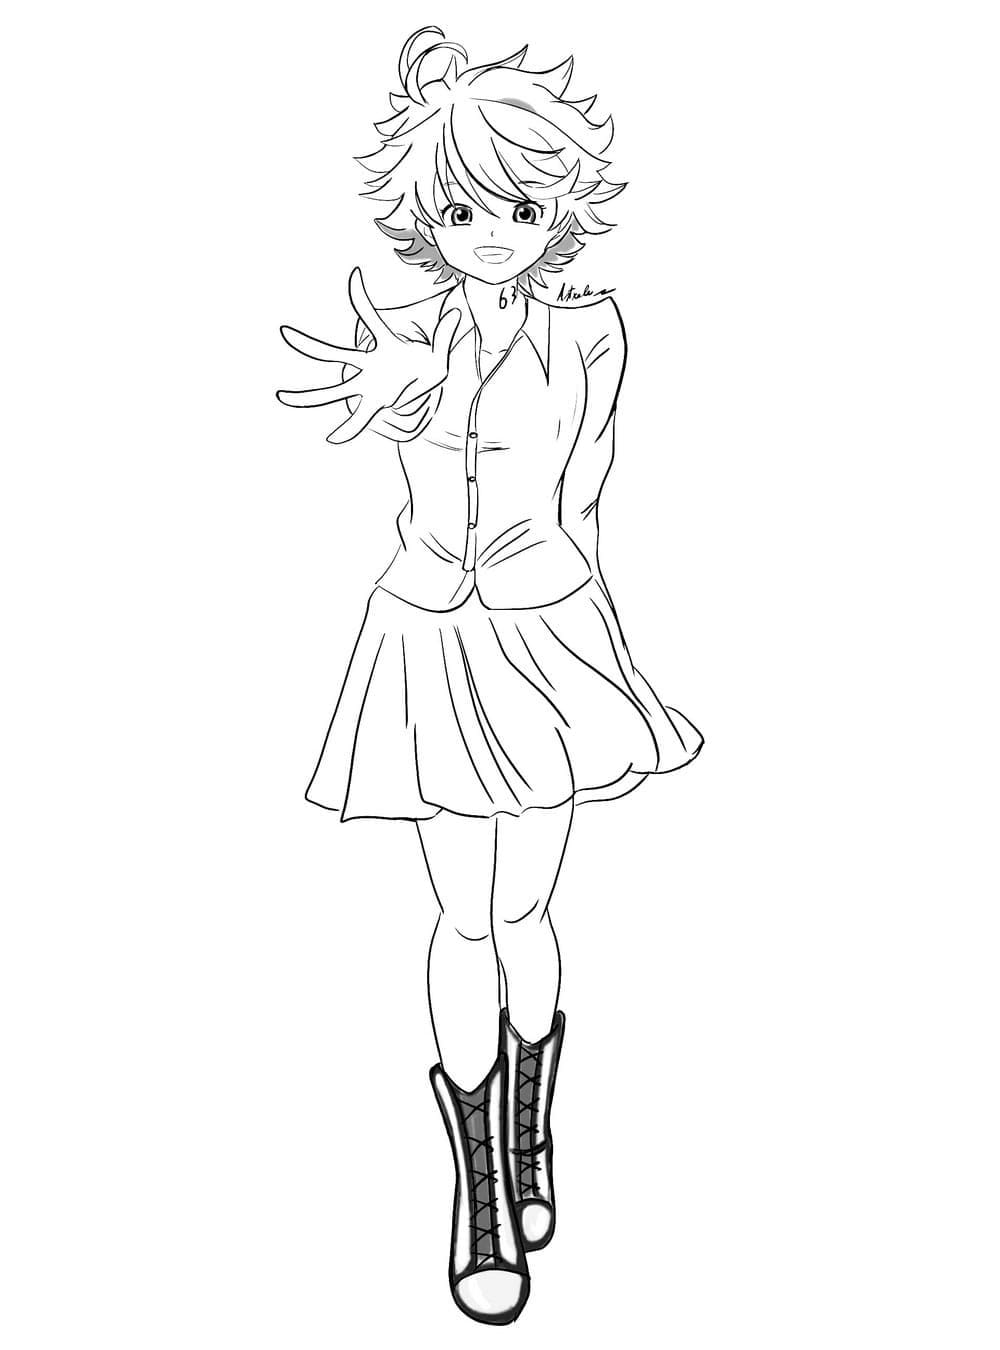 Emma from The Promised Neverland Coloring Page